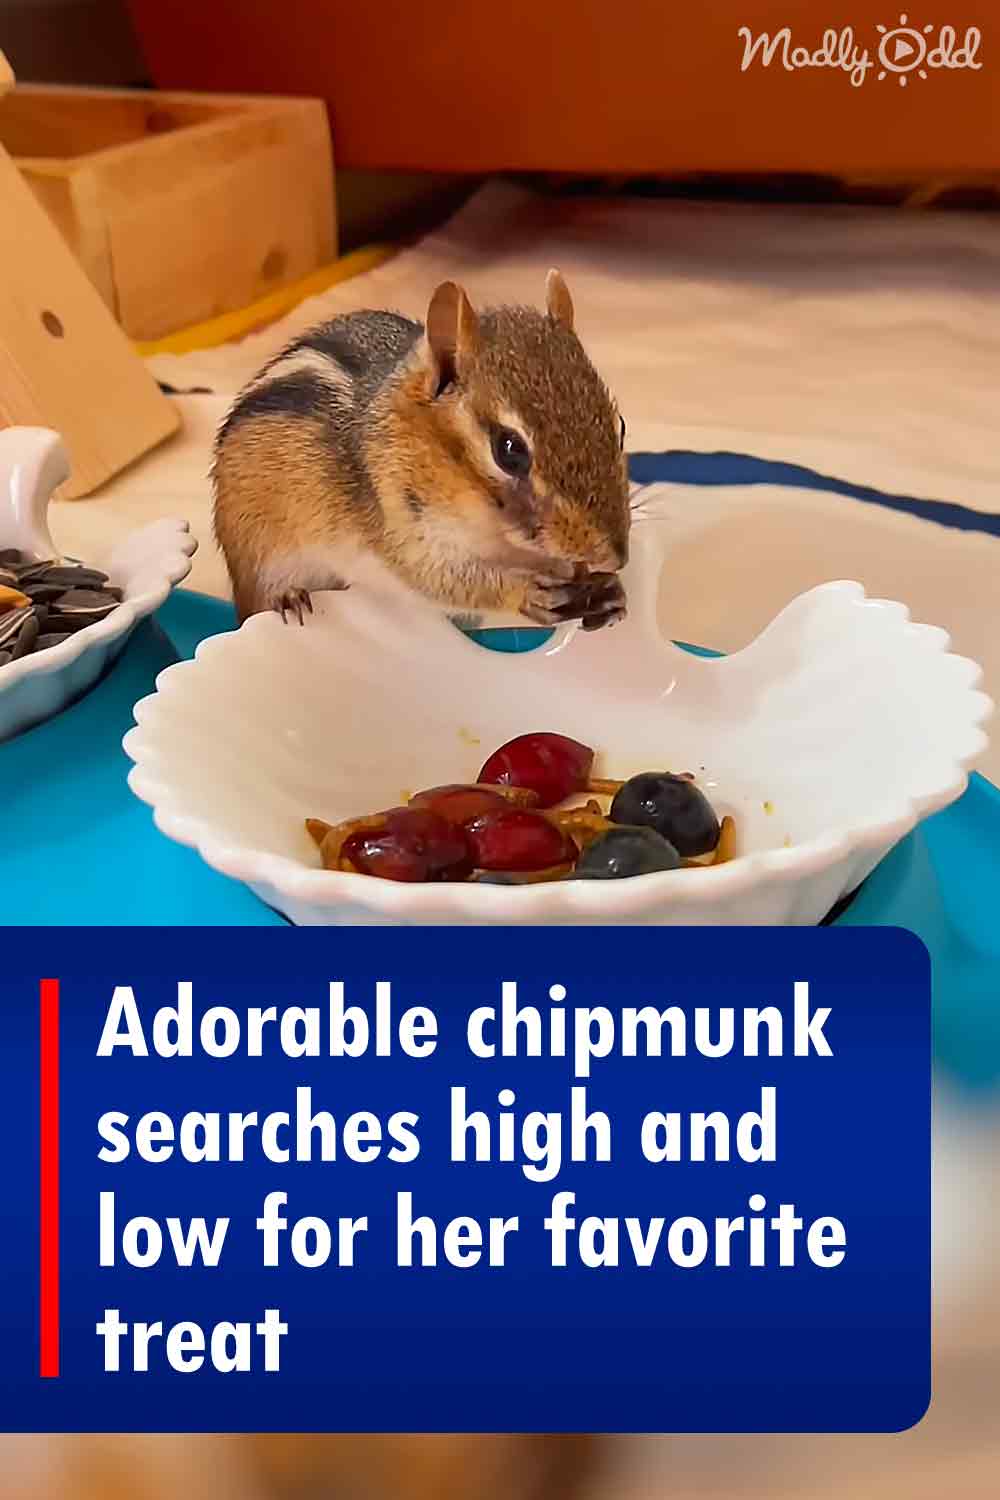 Adorable chipmunk searches high and low for her favorite treat